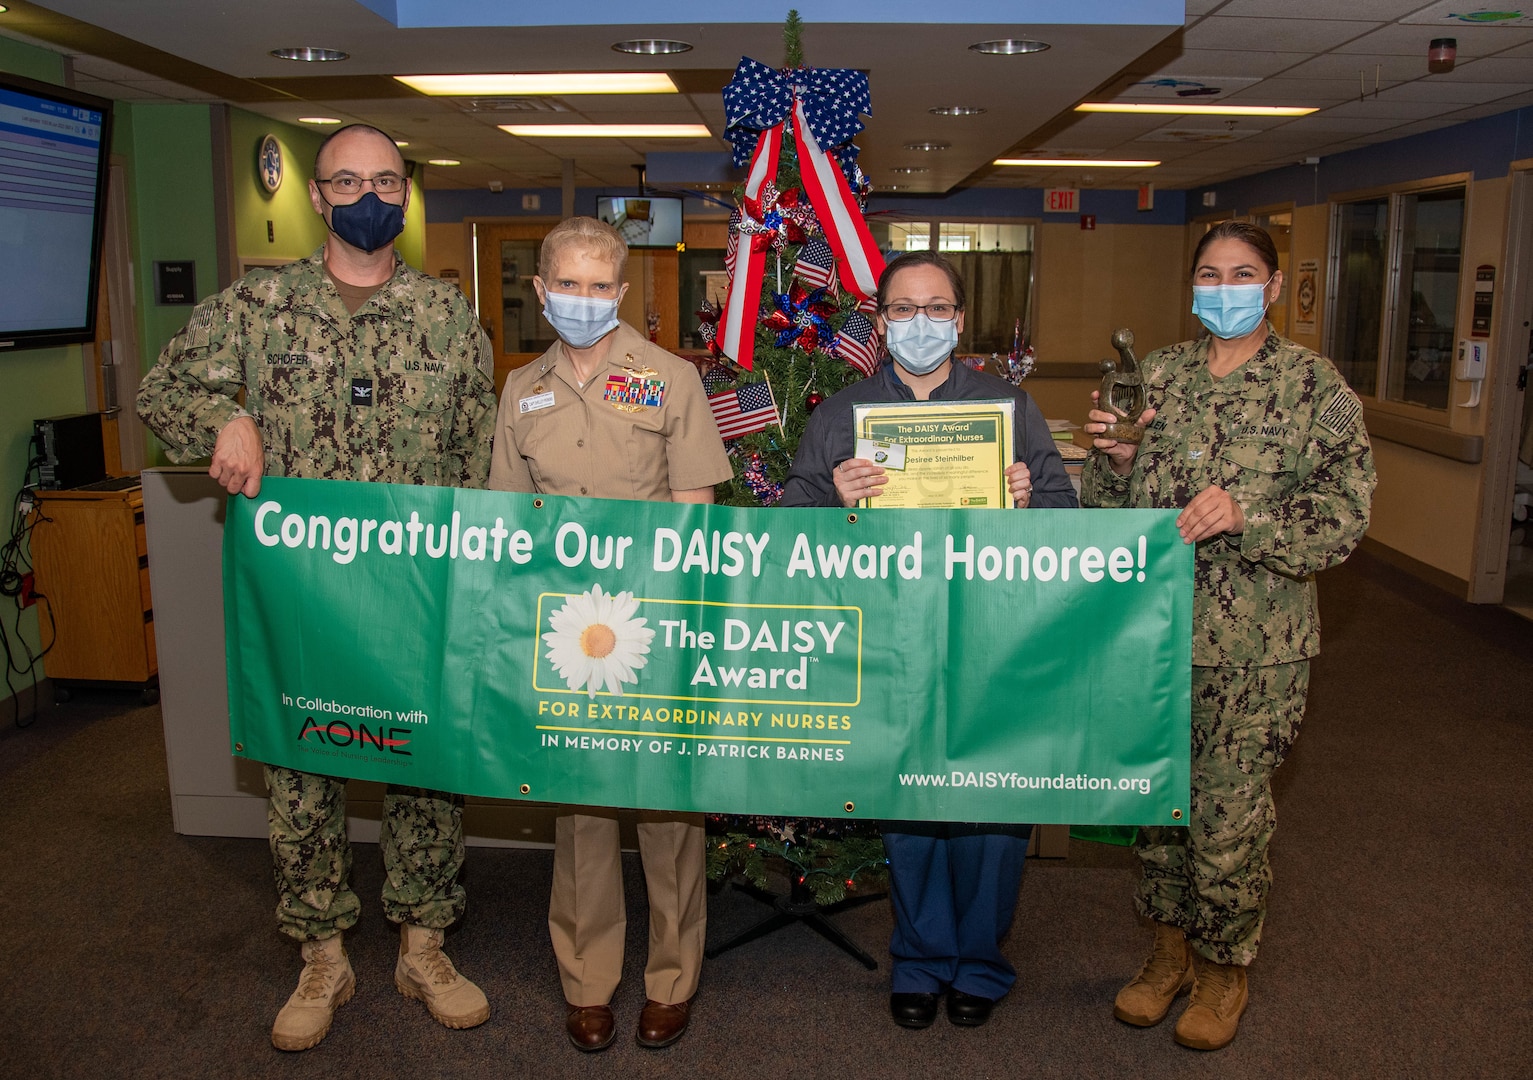 PORTSMOUTH, Va. (June 6, 2022) - Capt. Shelley Perkins, commanding officer of Naval Medical Center Portsmouth (NMCP), center left, and Capt. Joel Schofer, executive officer of NMCP, left, present Lt. Desiree Steinhilber, an NMCP nurse, with a DAISY Award during a ceremony, June 6. The DAISY Award was established by The DAISY Foundation in 1999 by the family of J. Patrick (Pat) Barnes, a patient who lost his life to the auto-immune disease ITP. Barnes’ family wanted to recognize the incredible care that the nurses provided him before his death and created the award now embraced by healthcare organizations around the world. (U.S. Navy photo by Mass Communication Specialist 2nd Class Dylan M. Kinee/Released)